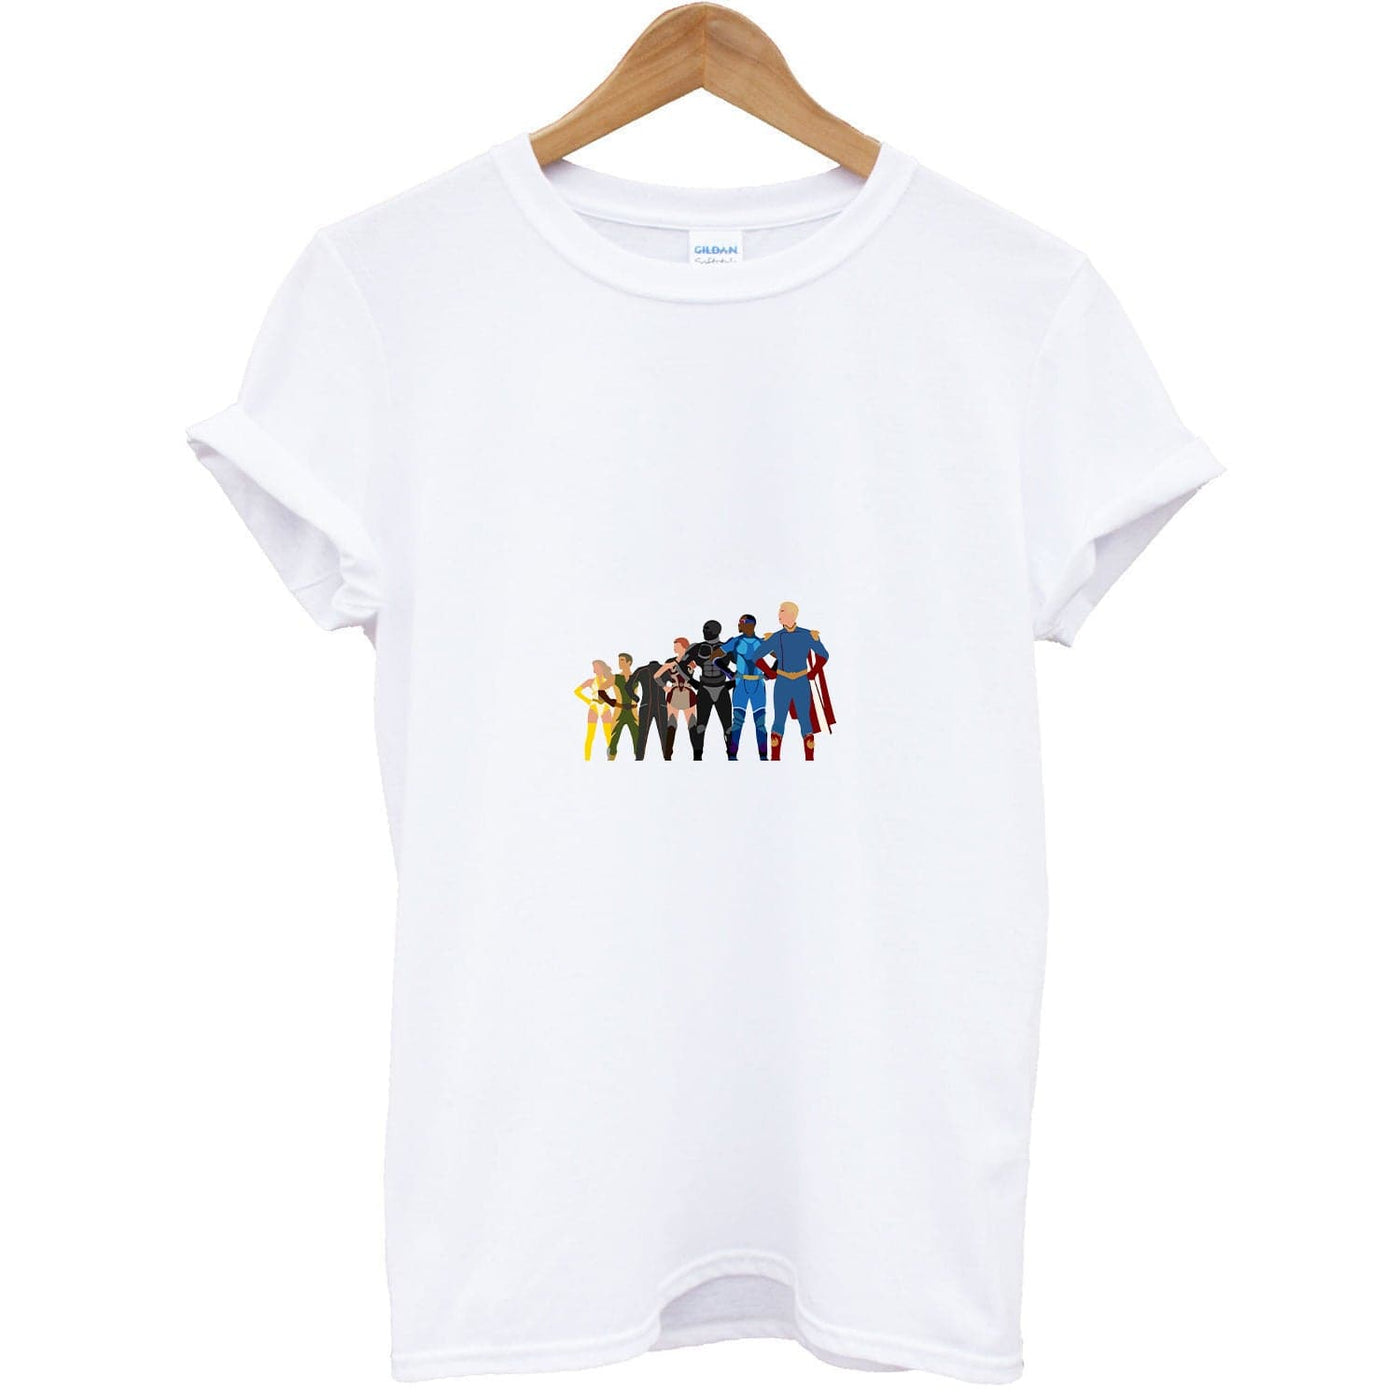 The Seven - The Boys T-Shirt